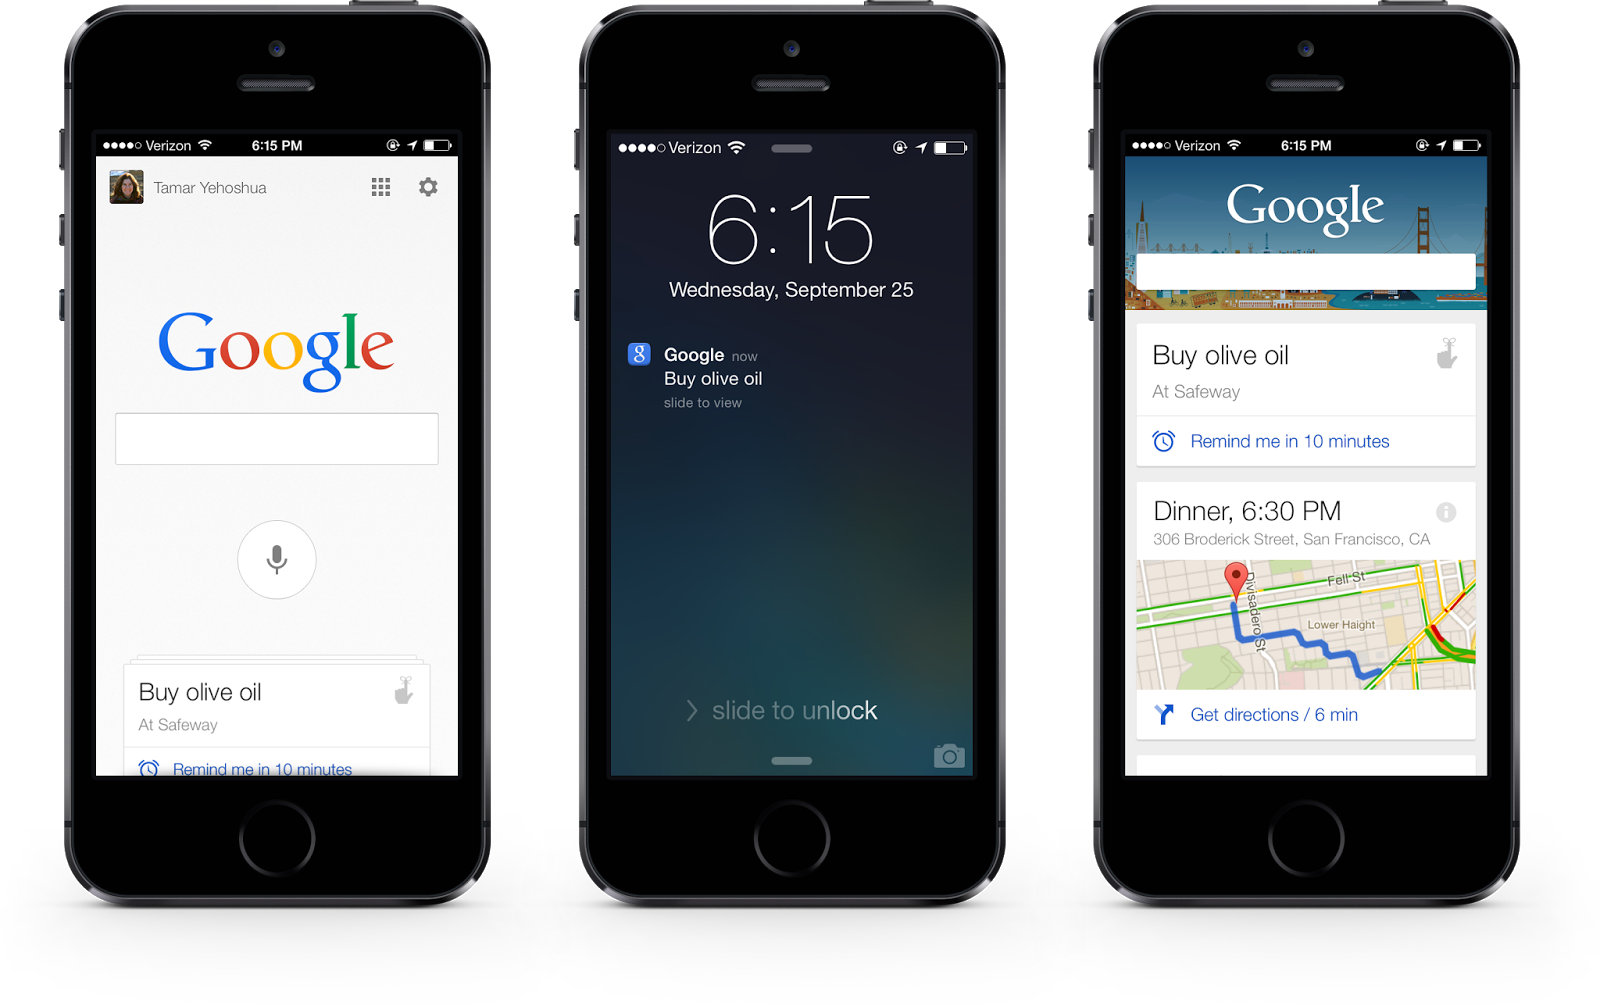 Google Search for iOS gets push notifications for reminders